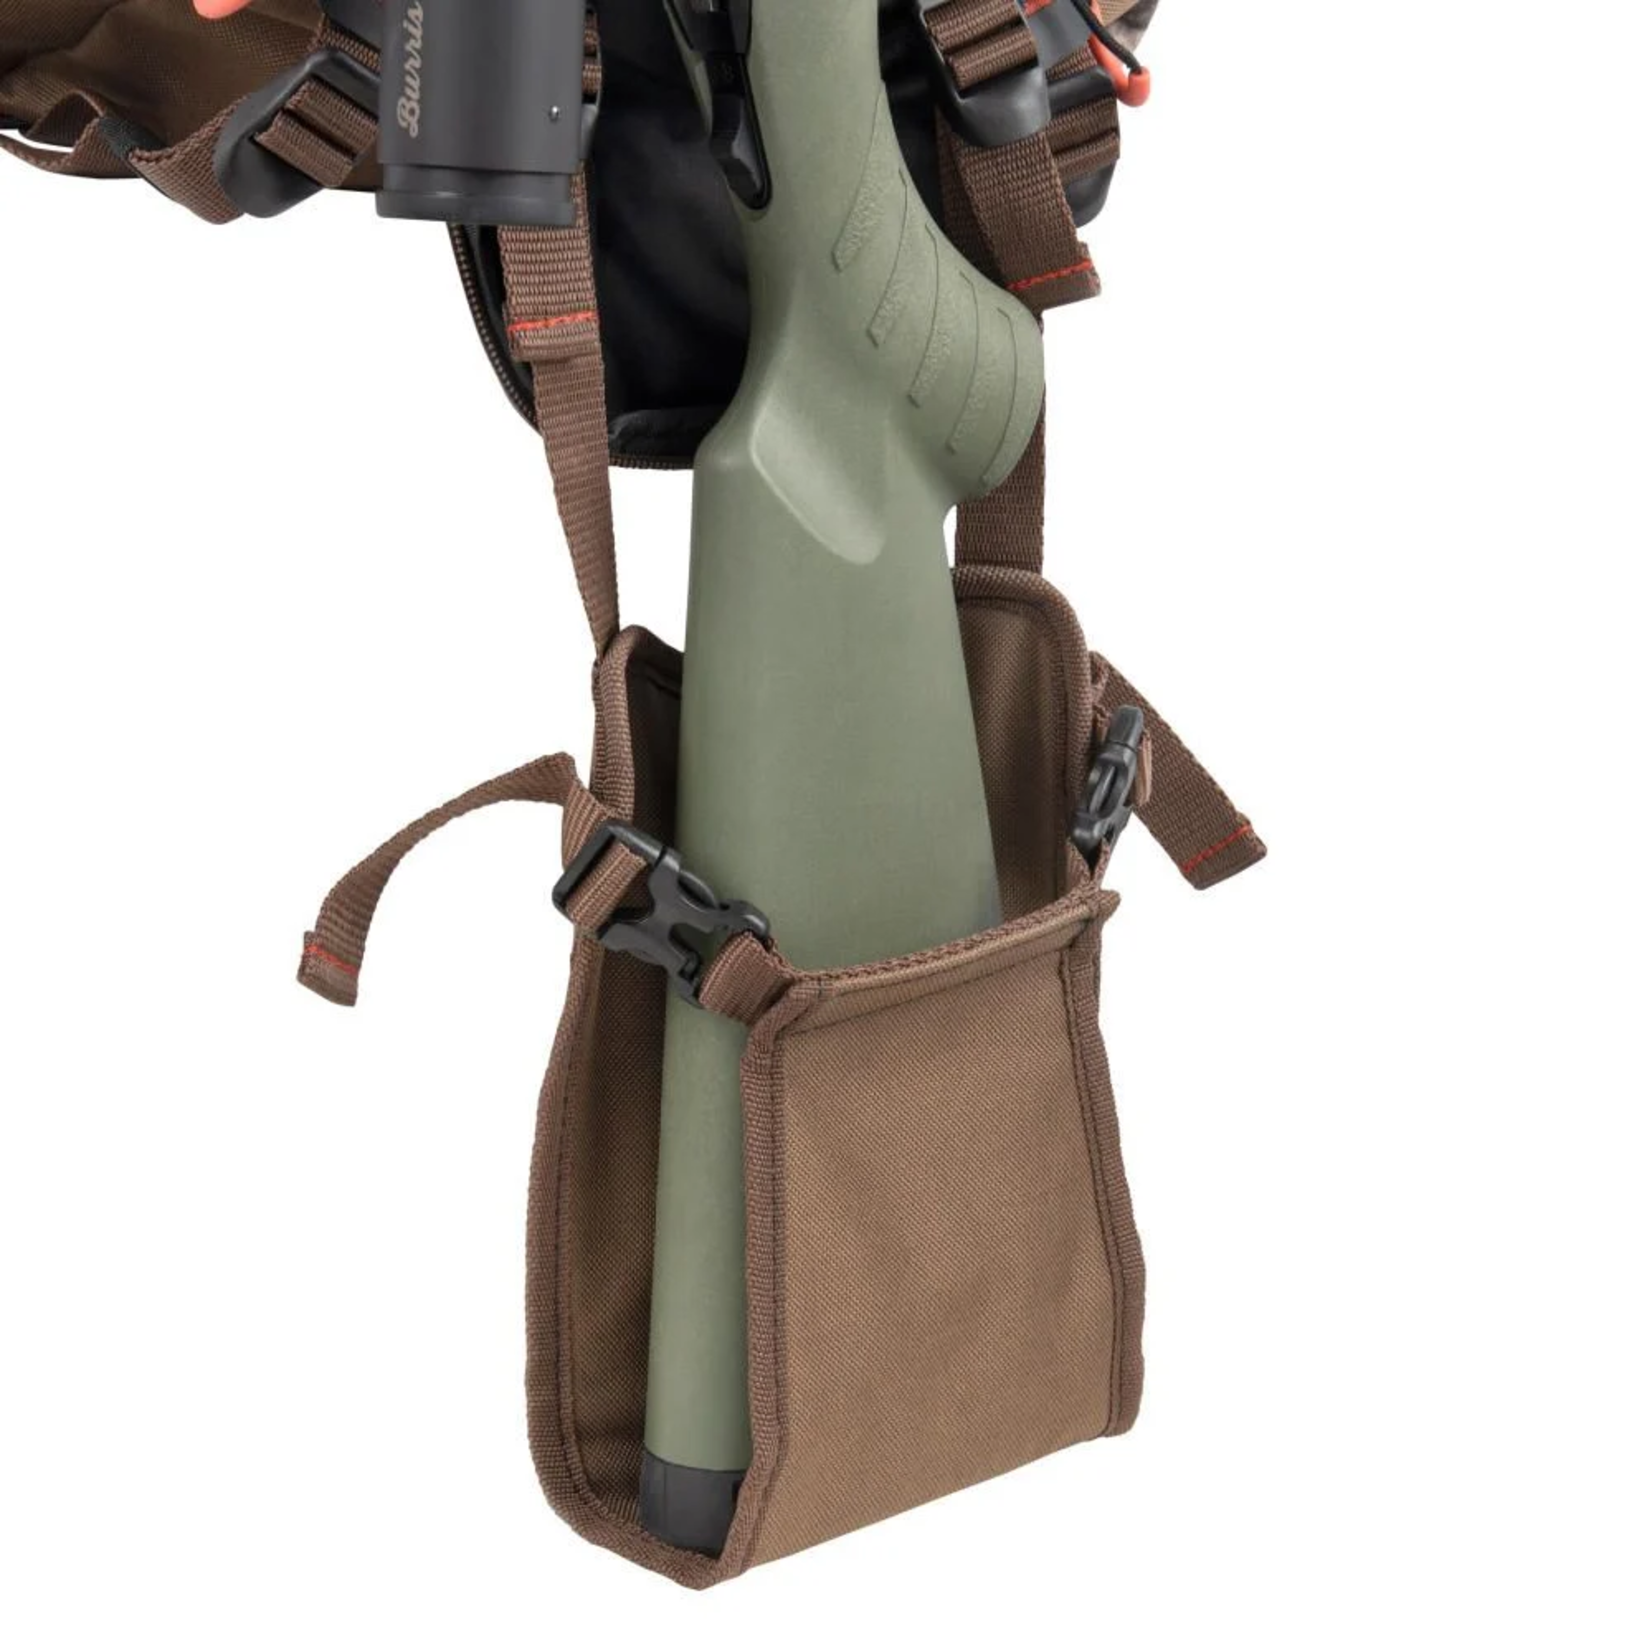 Allen CRATER MULTI-DAY PACK